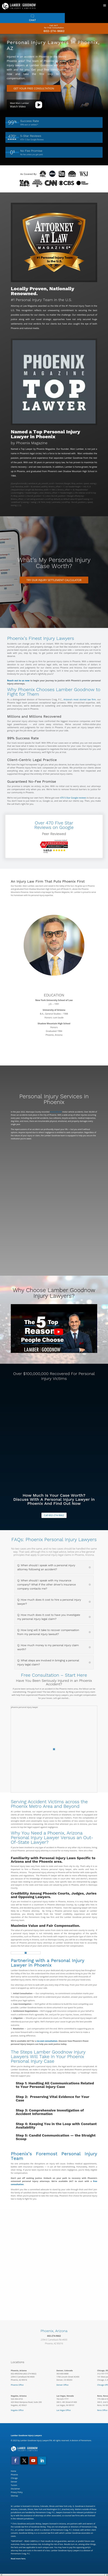 The Lamber-Goodnow Injury Law Team at Fennemore Craig, P.C. - Denver CO Lawyers